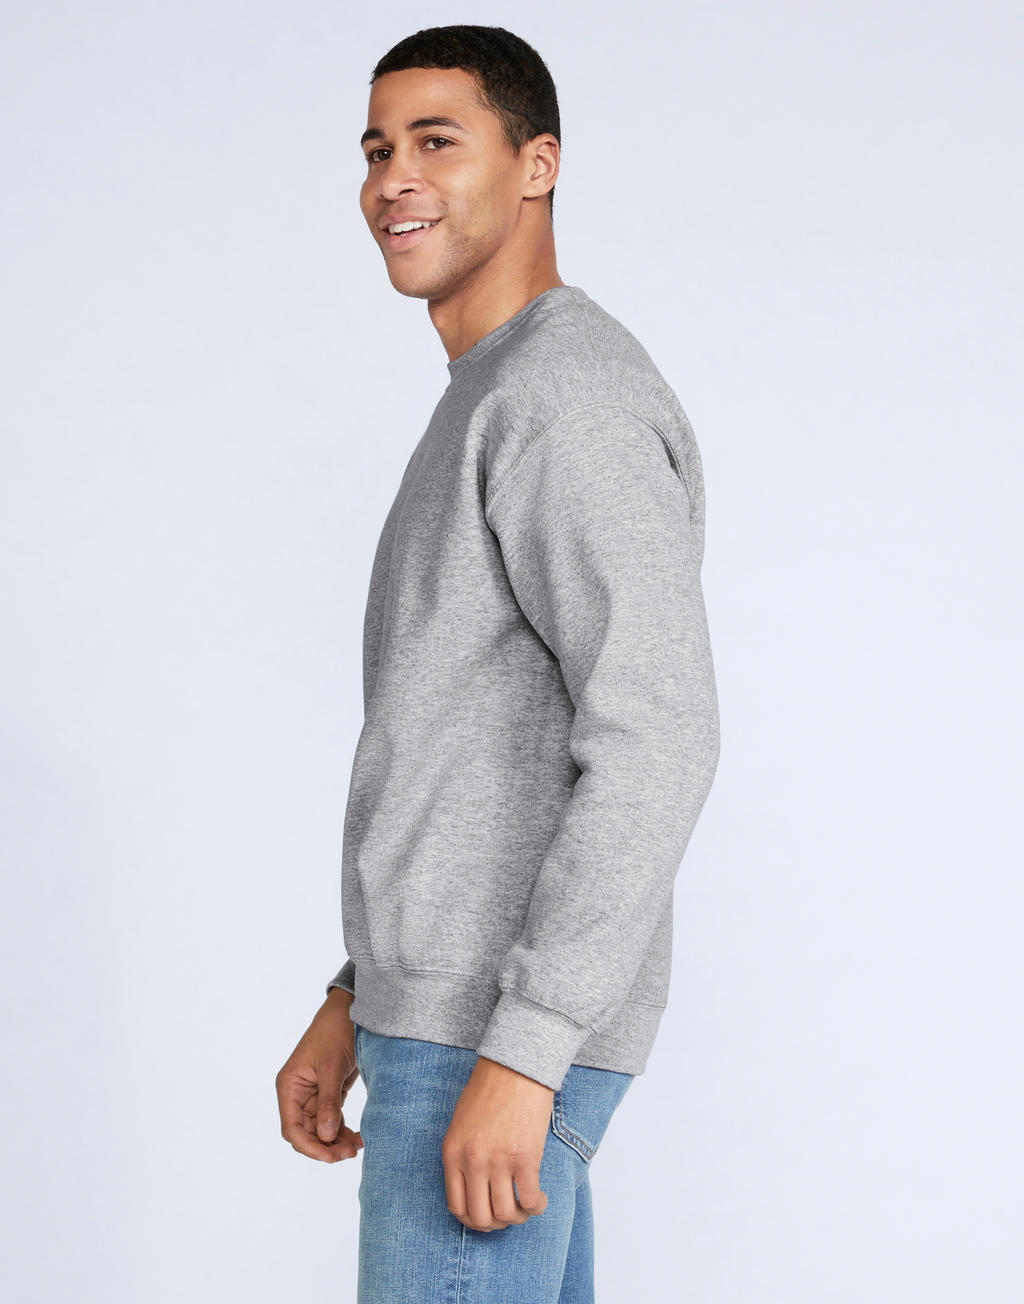  DryBlend Adult Crewneck Sweat in Farbe White